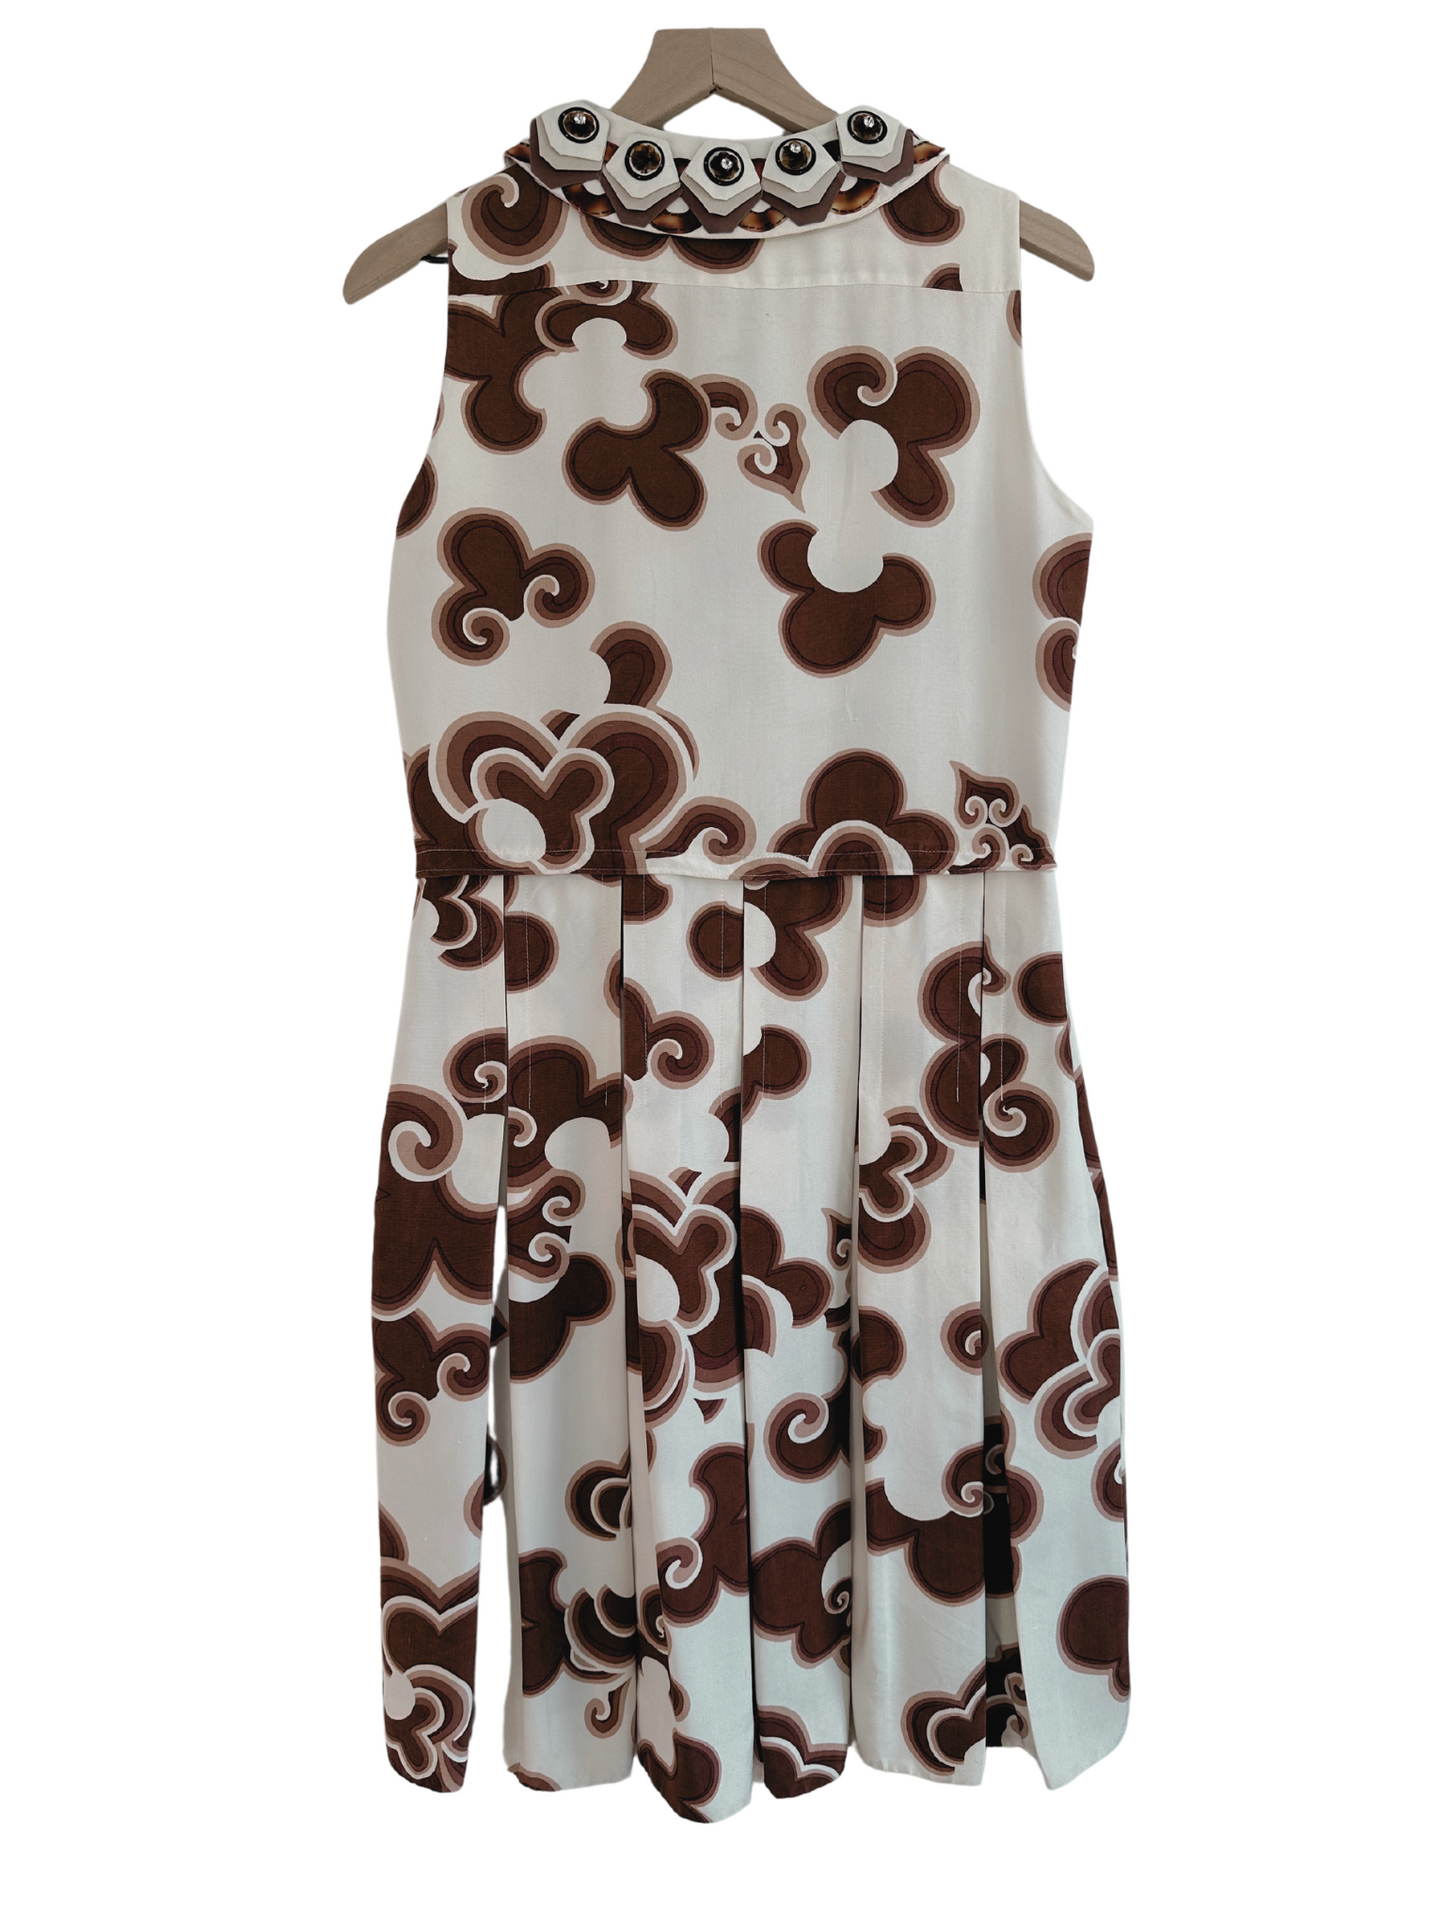 Chloé 2007 Brown and Cream Crystal Dress Size 38